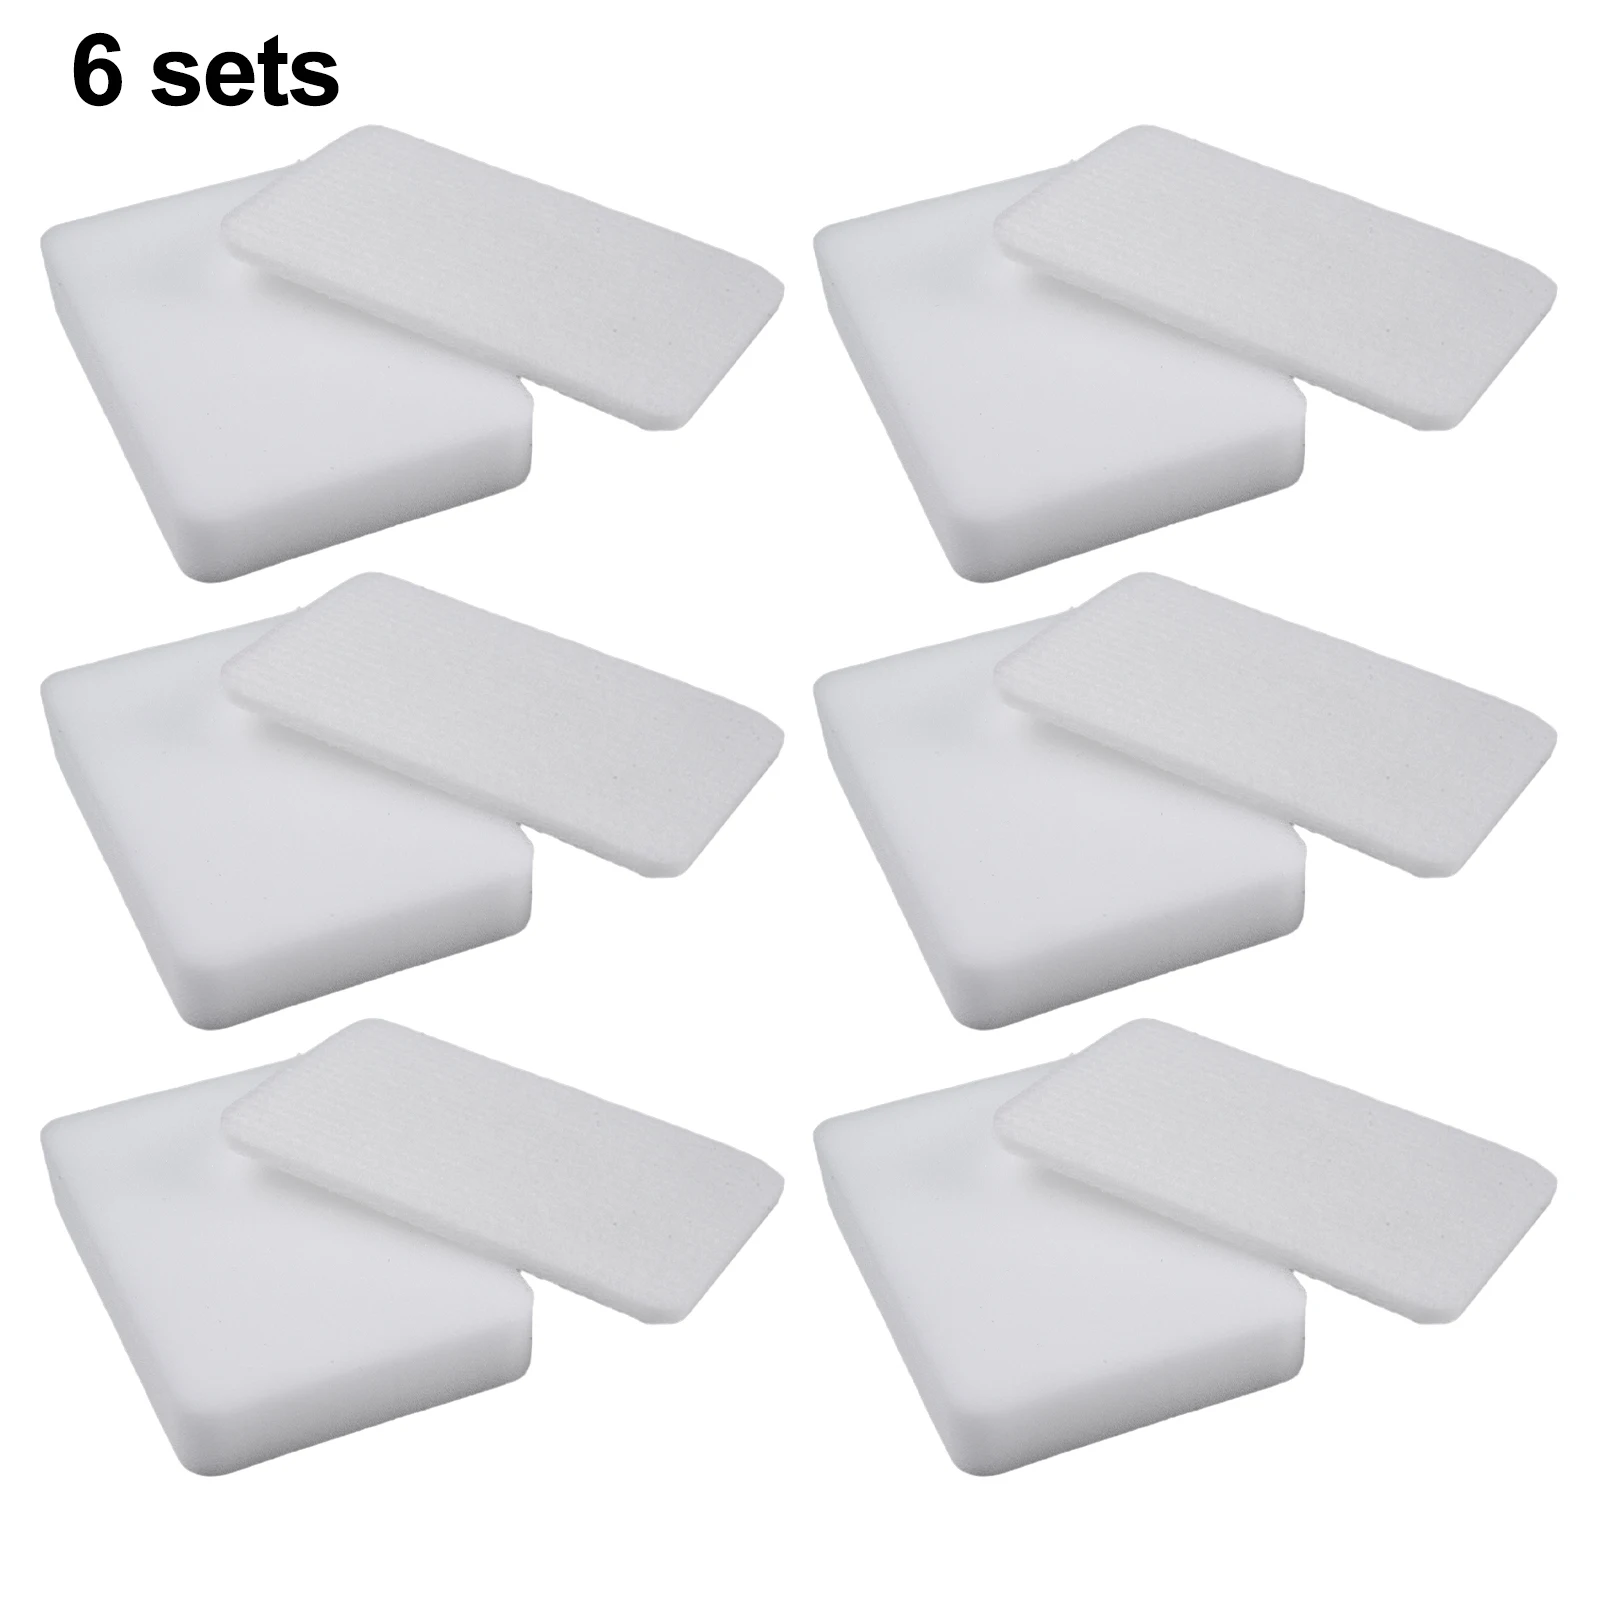 

6/3pcs Filter Sponge Replacement Kit For Shark IW3511 IW1111 Detect Pro Cordless Vacuum Cleaner Household Cleaning Tools